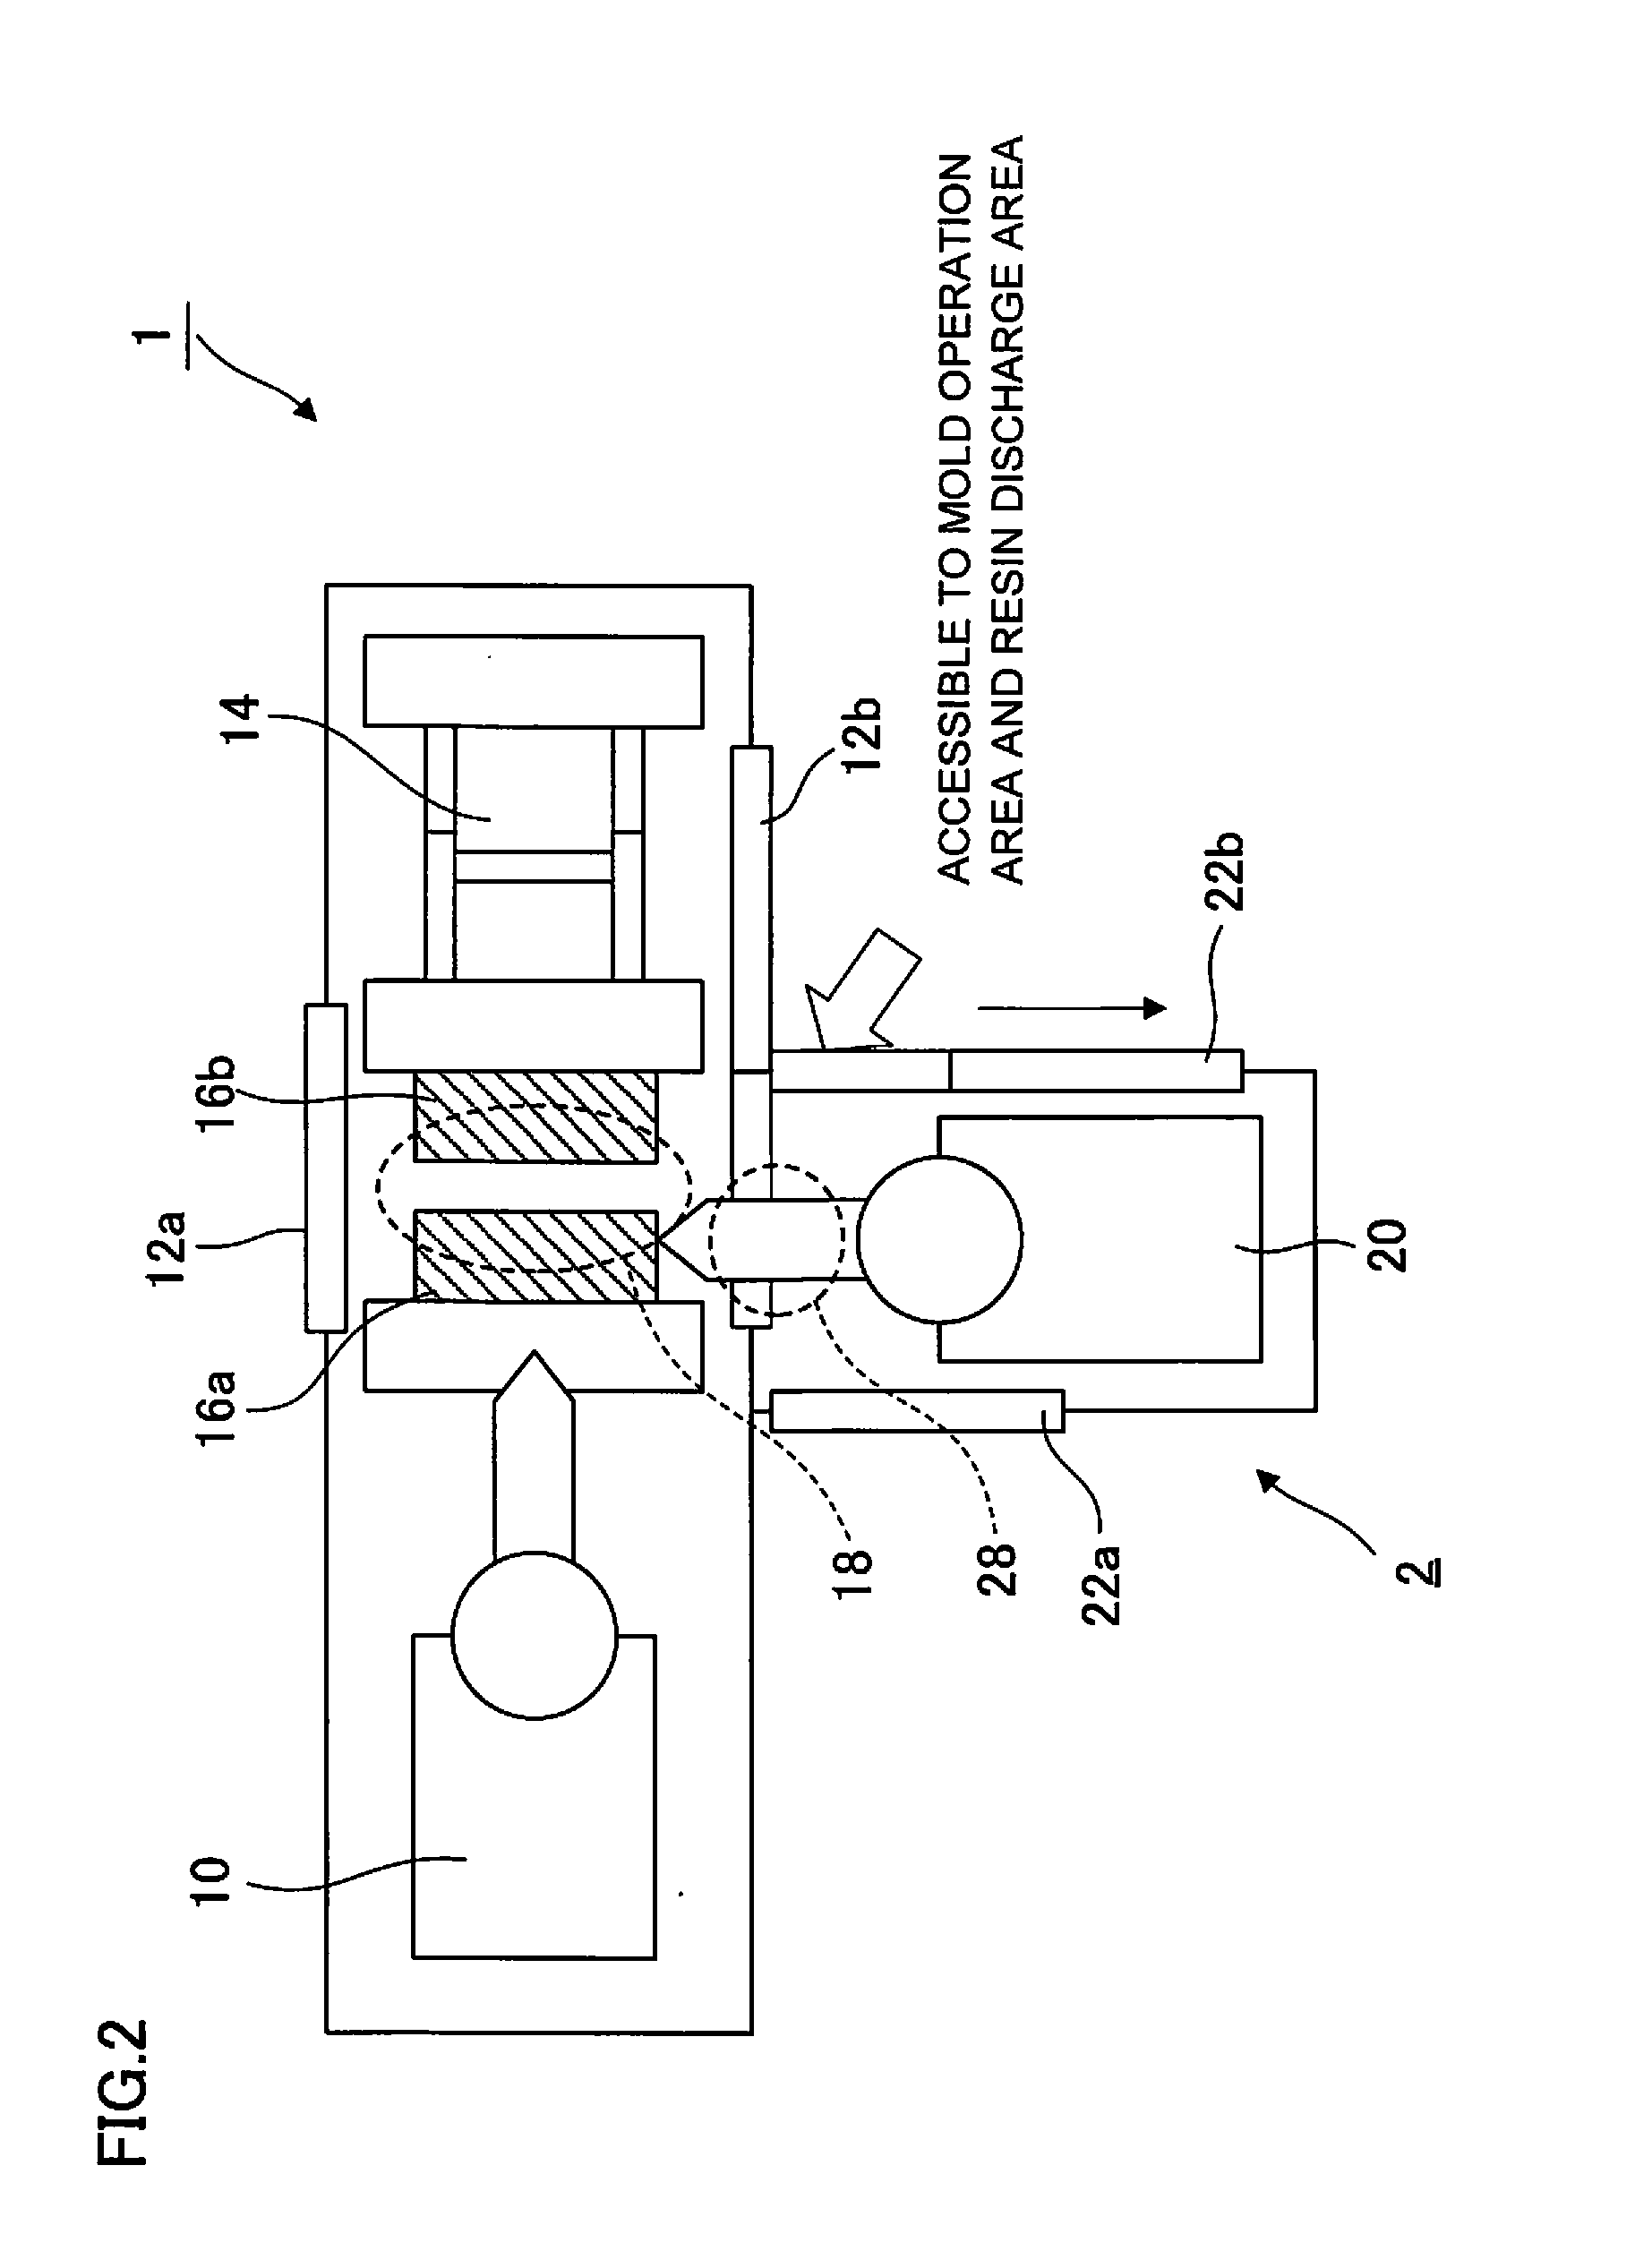 Injection molding system with additional injection device